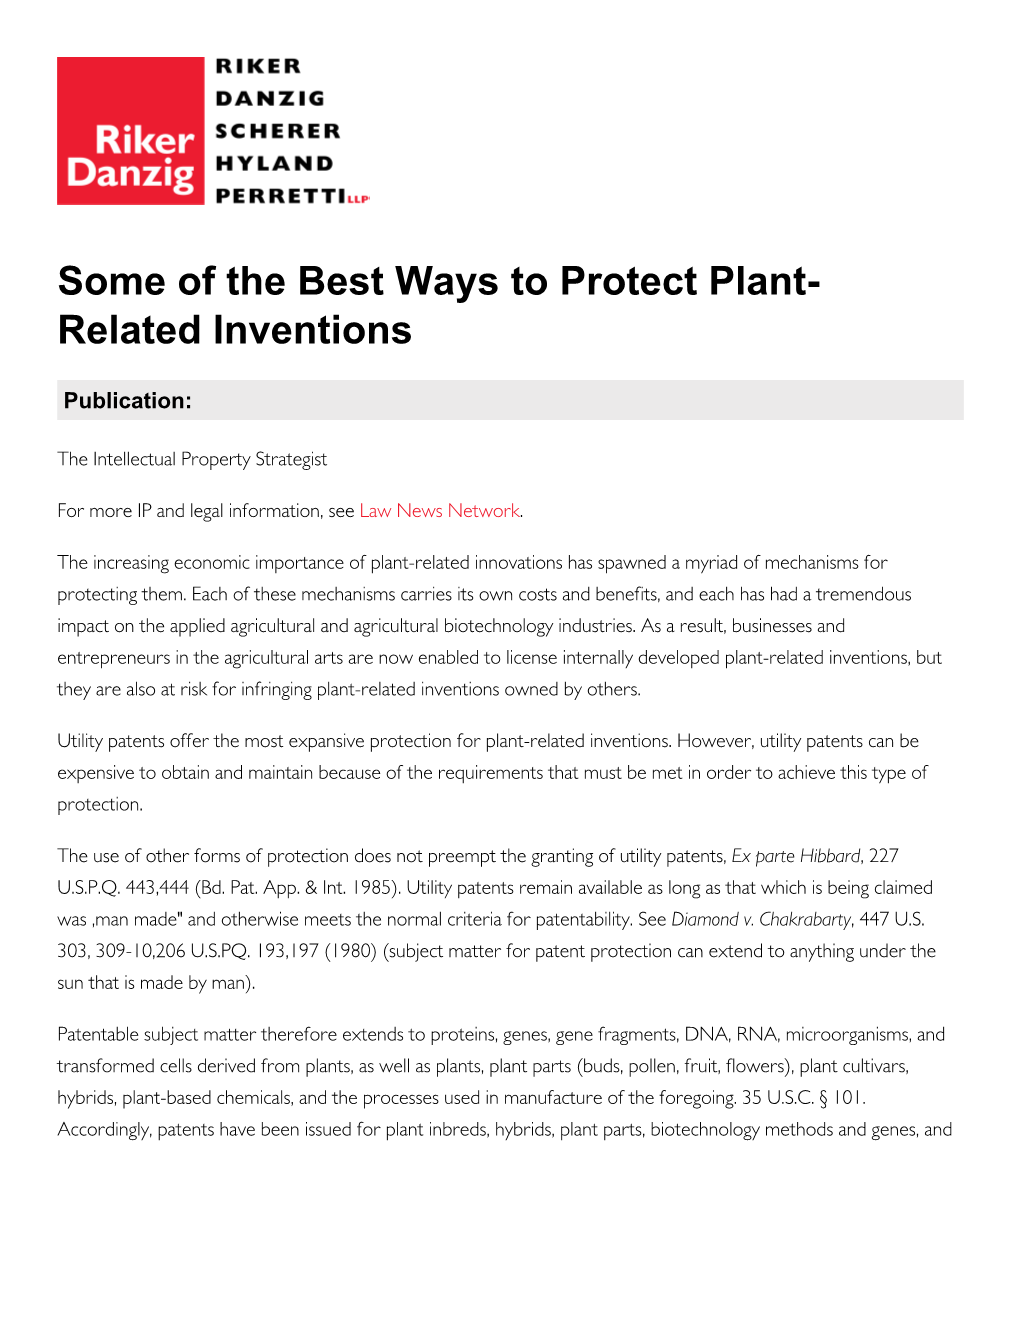 Some of the Best Ways to Protect Plant-Related Inventions